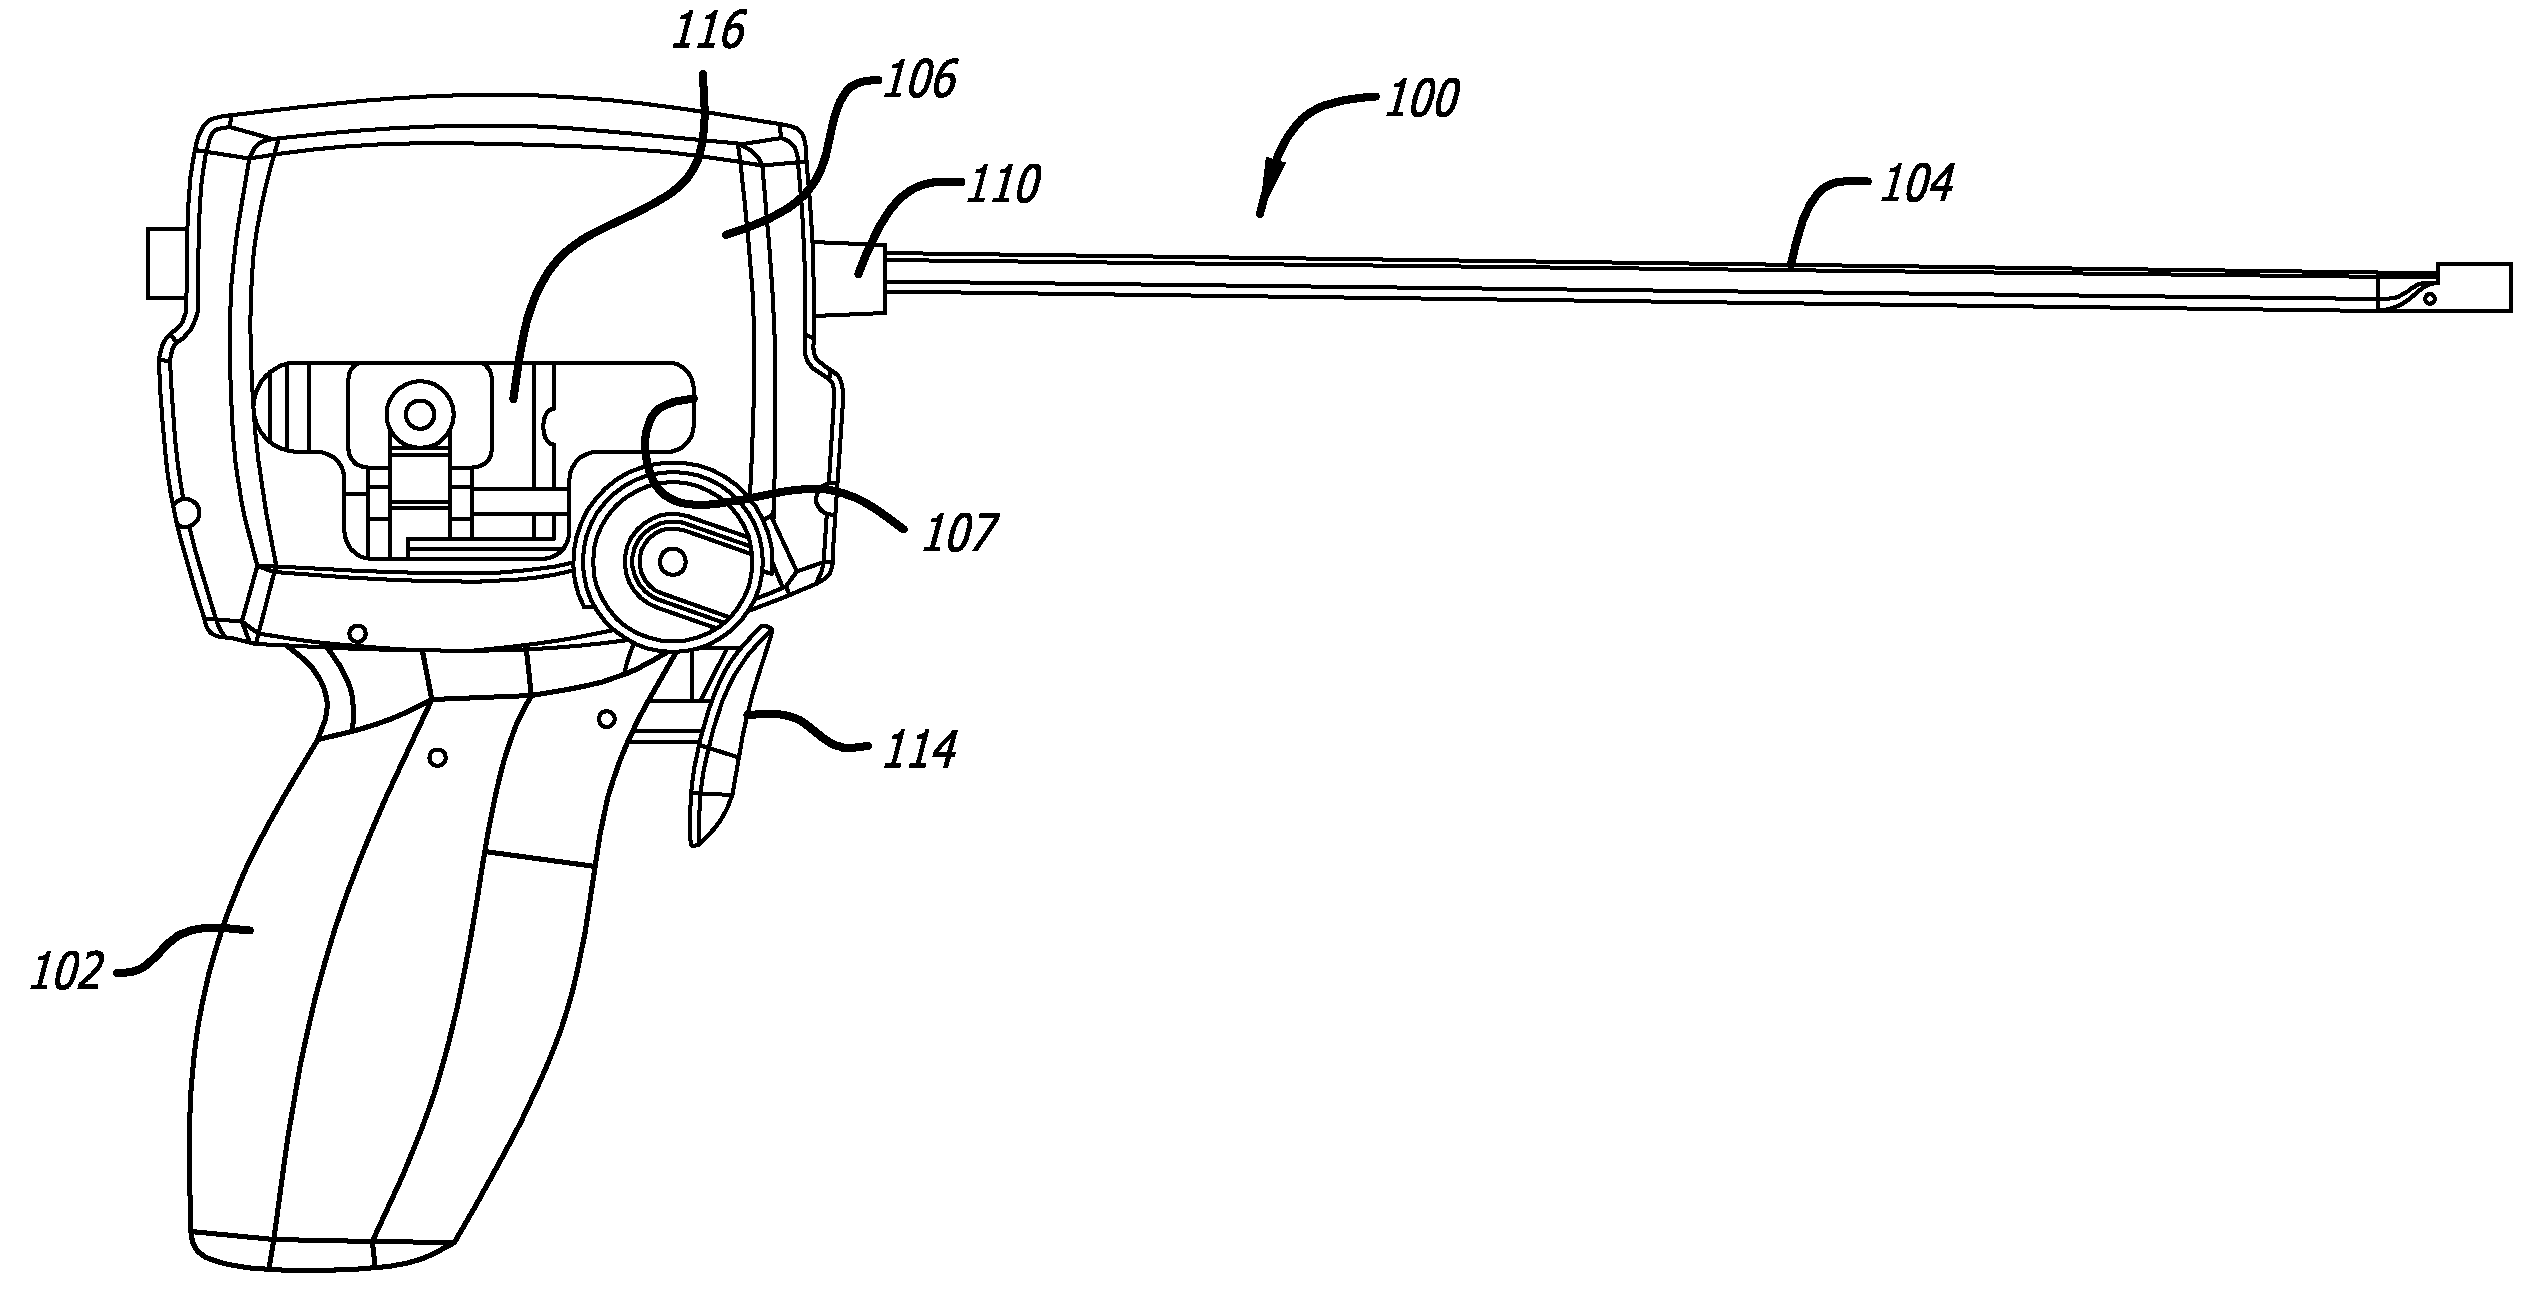 Multi-Actuating Trigger Anchor Delivery System